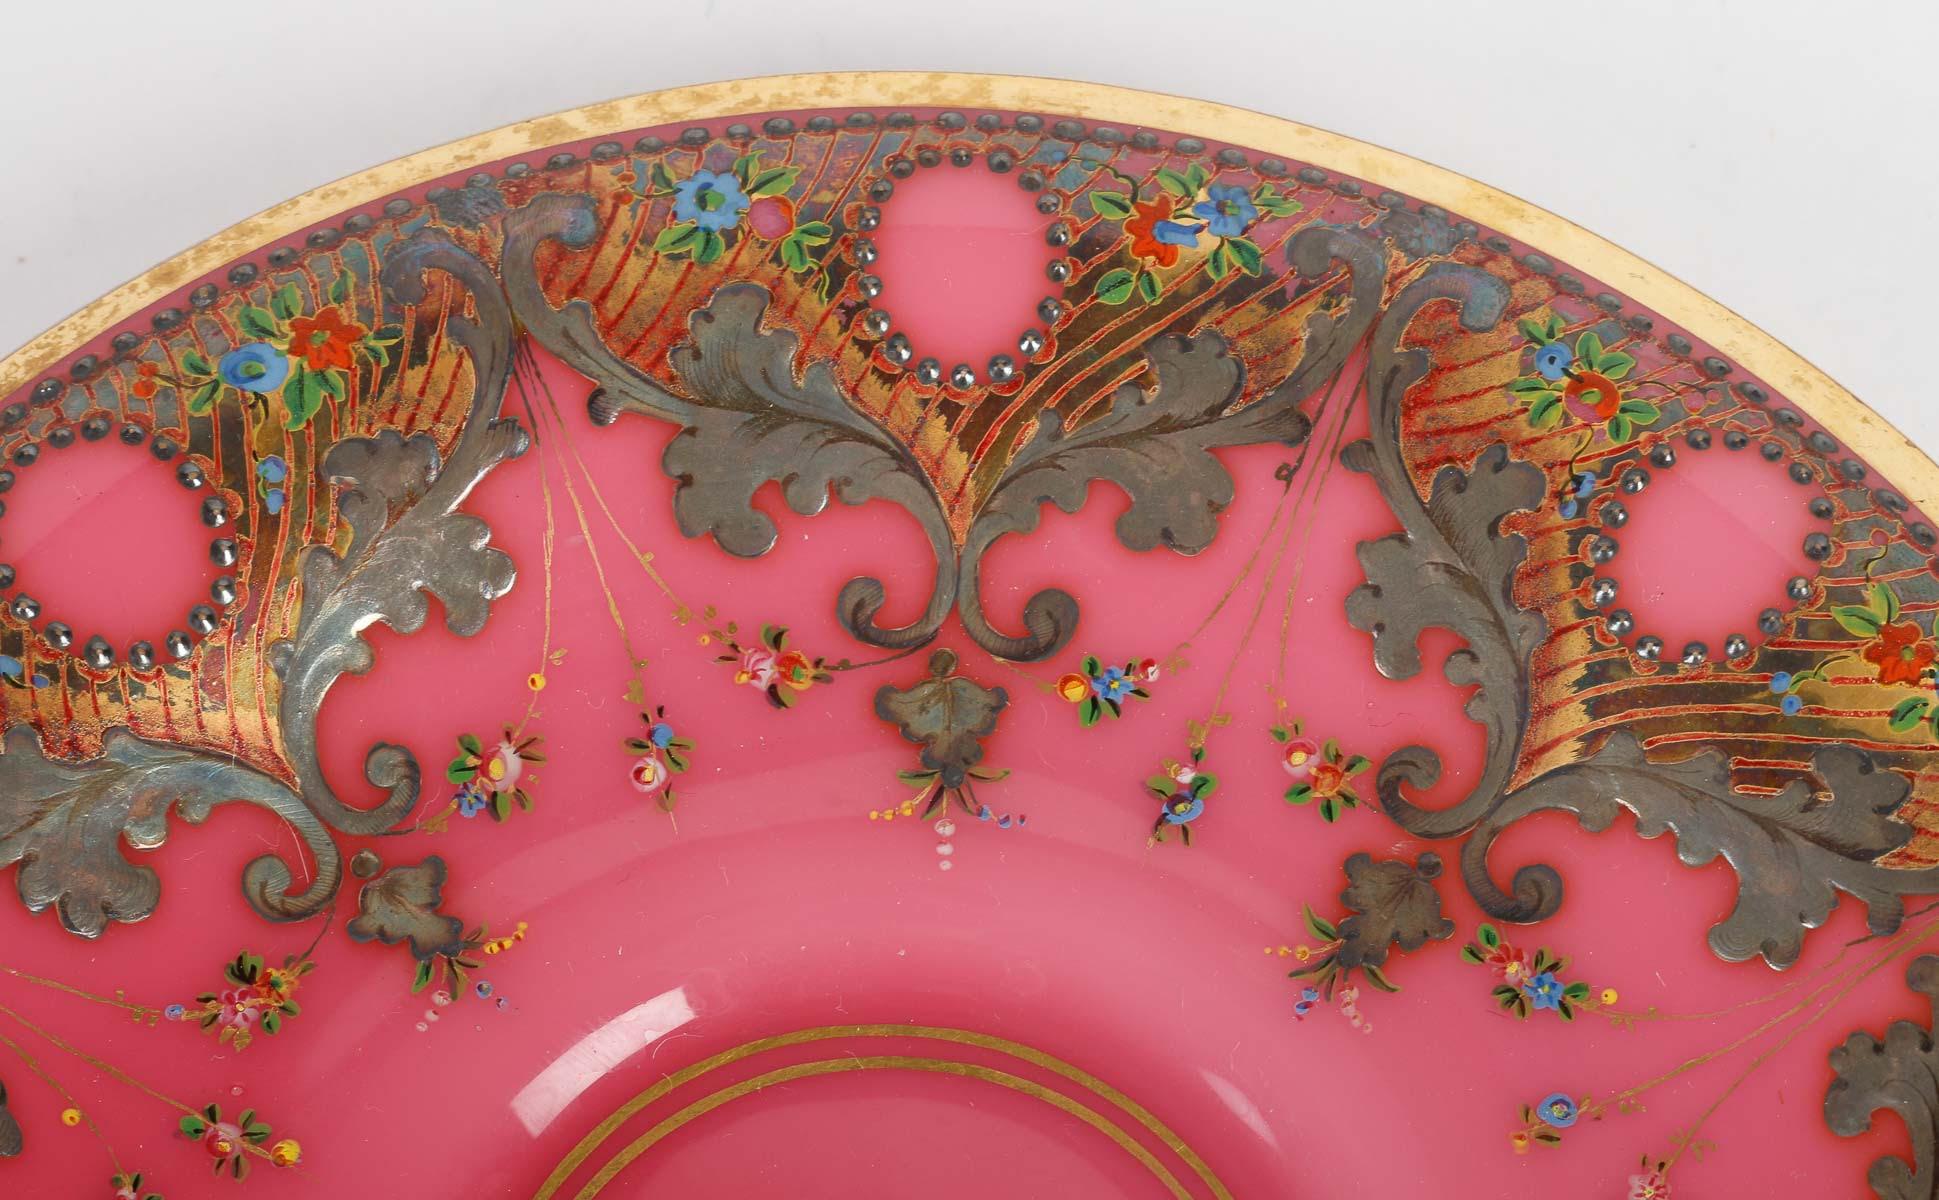 White and Pink Opaline Service Enamelled with Silver and Gold, 19th Century. 11